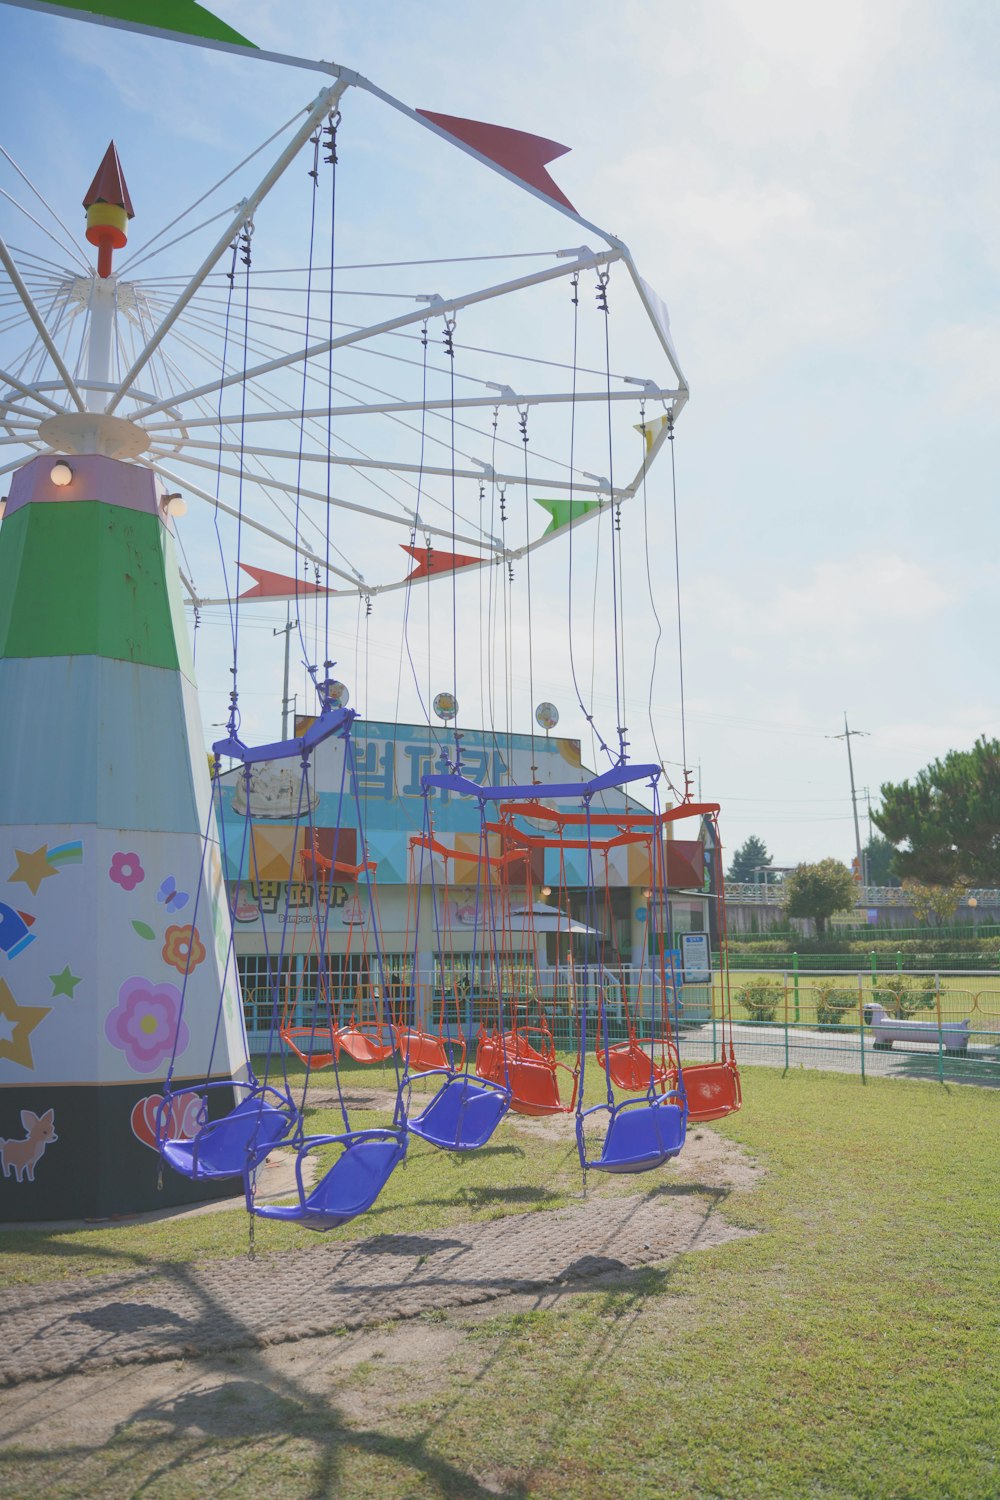 an amusement park with a ferris wheel and swings